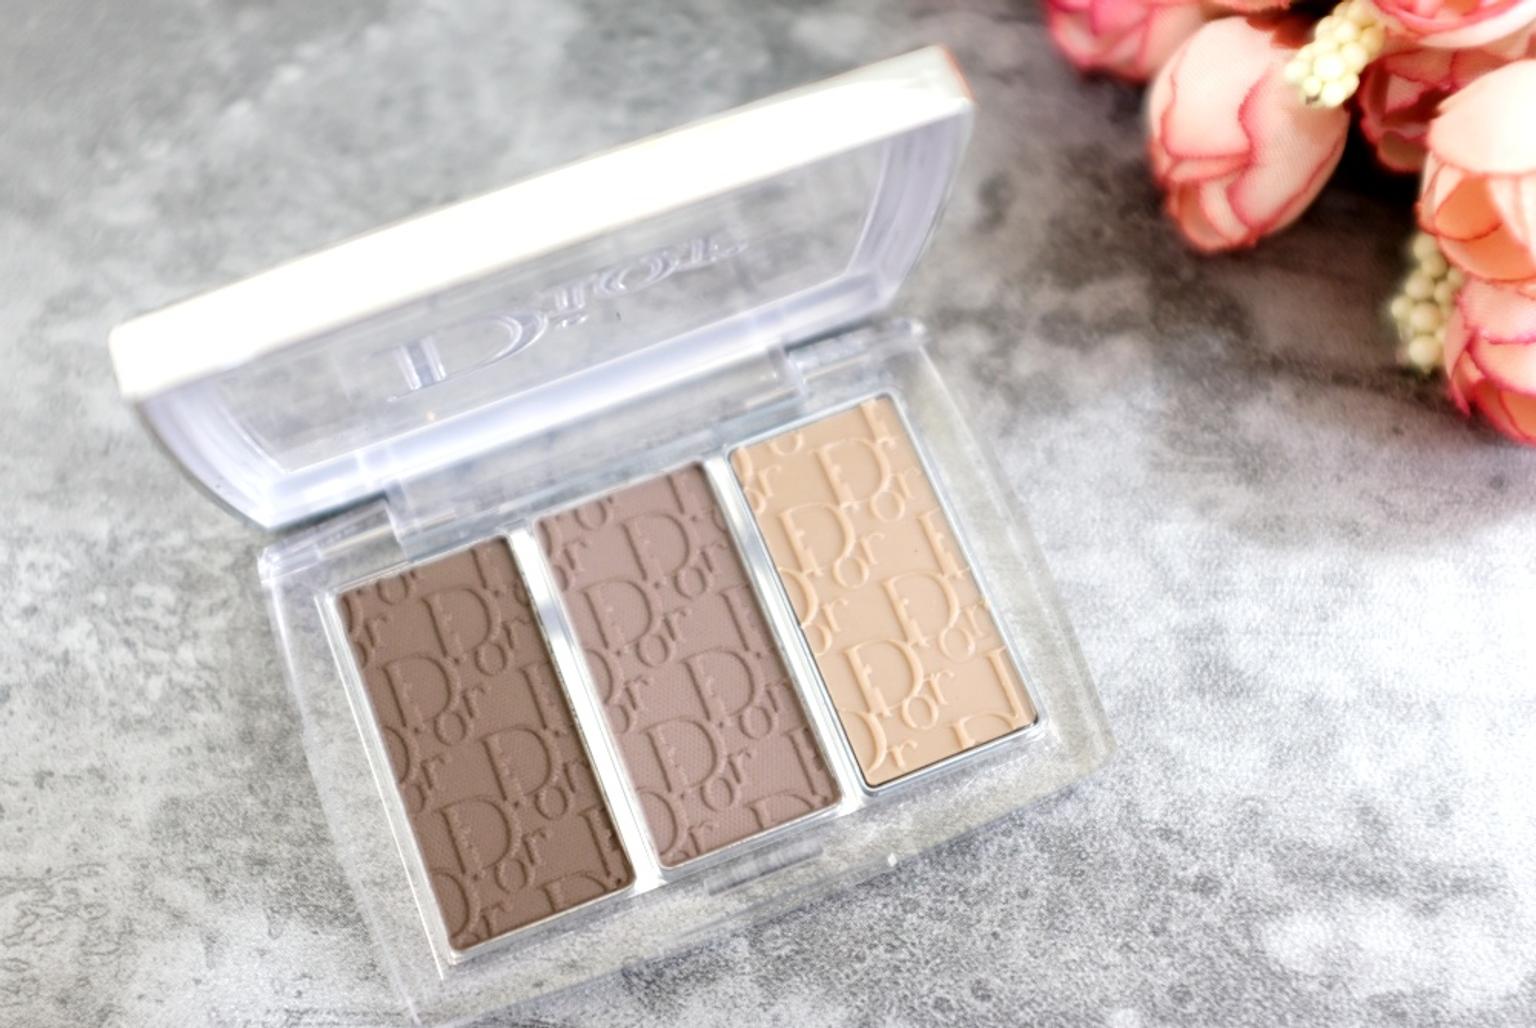 dior backstage brow palette swatches